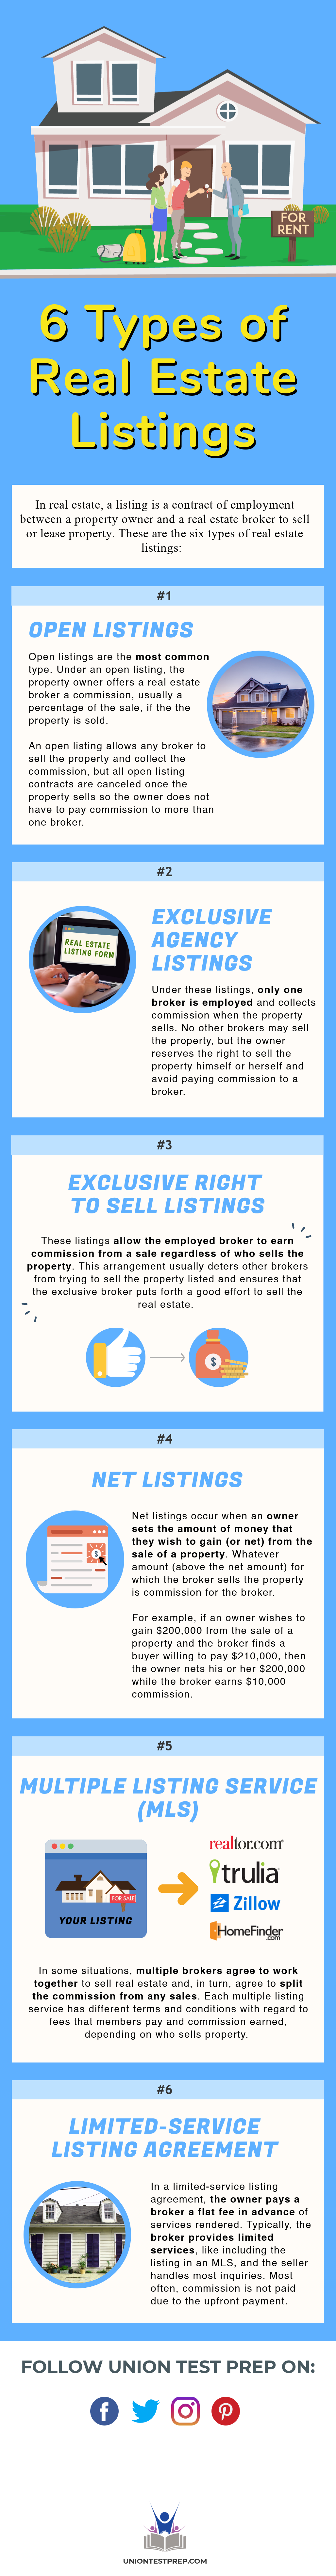 Real Estate Listing Types